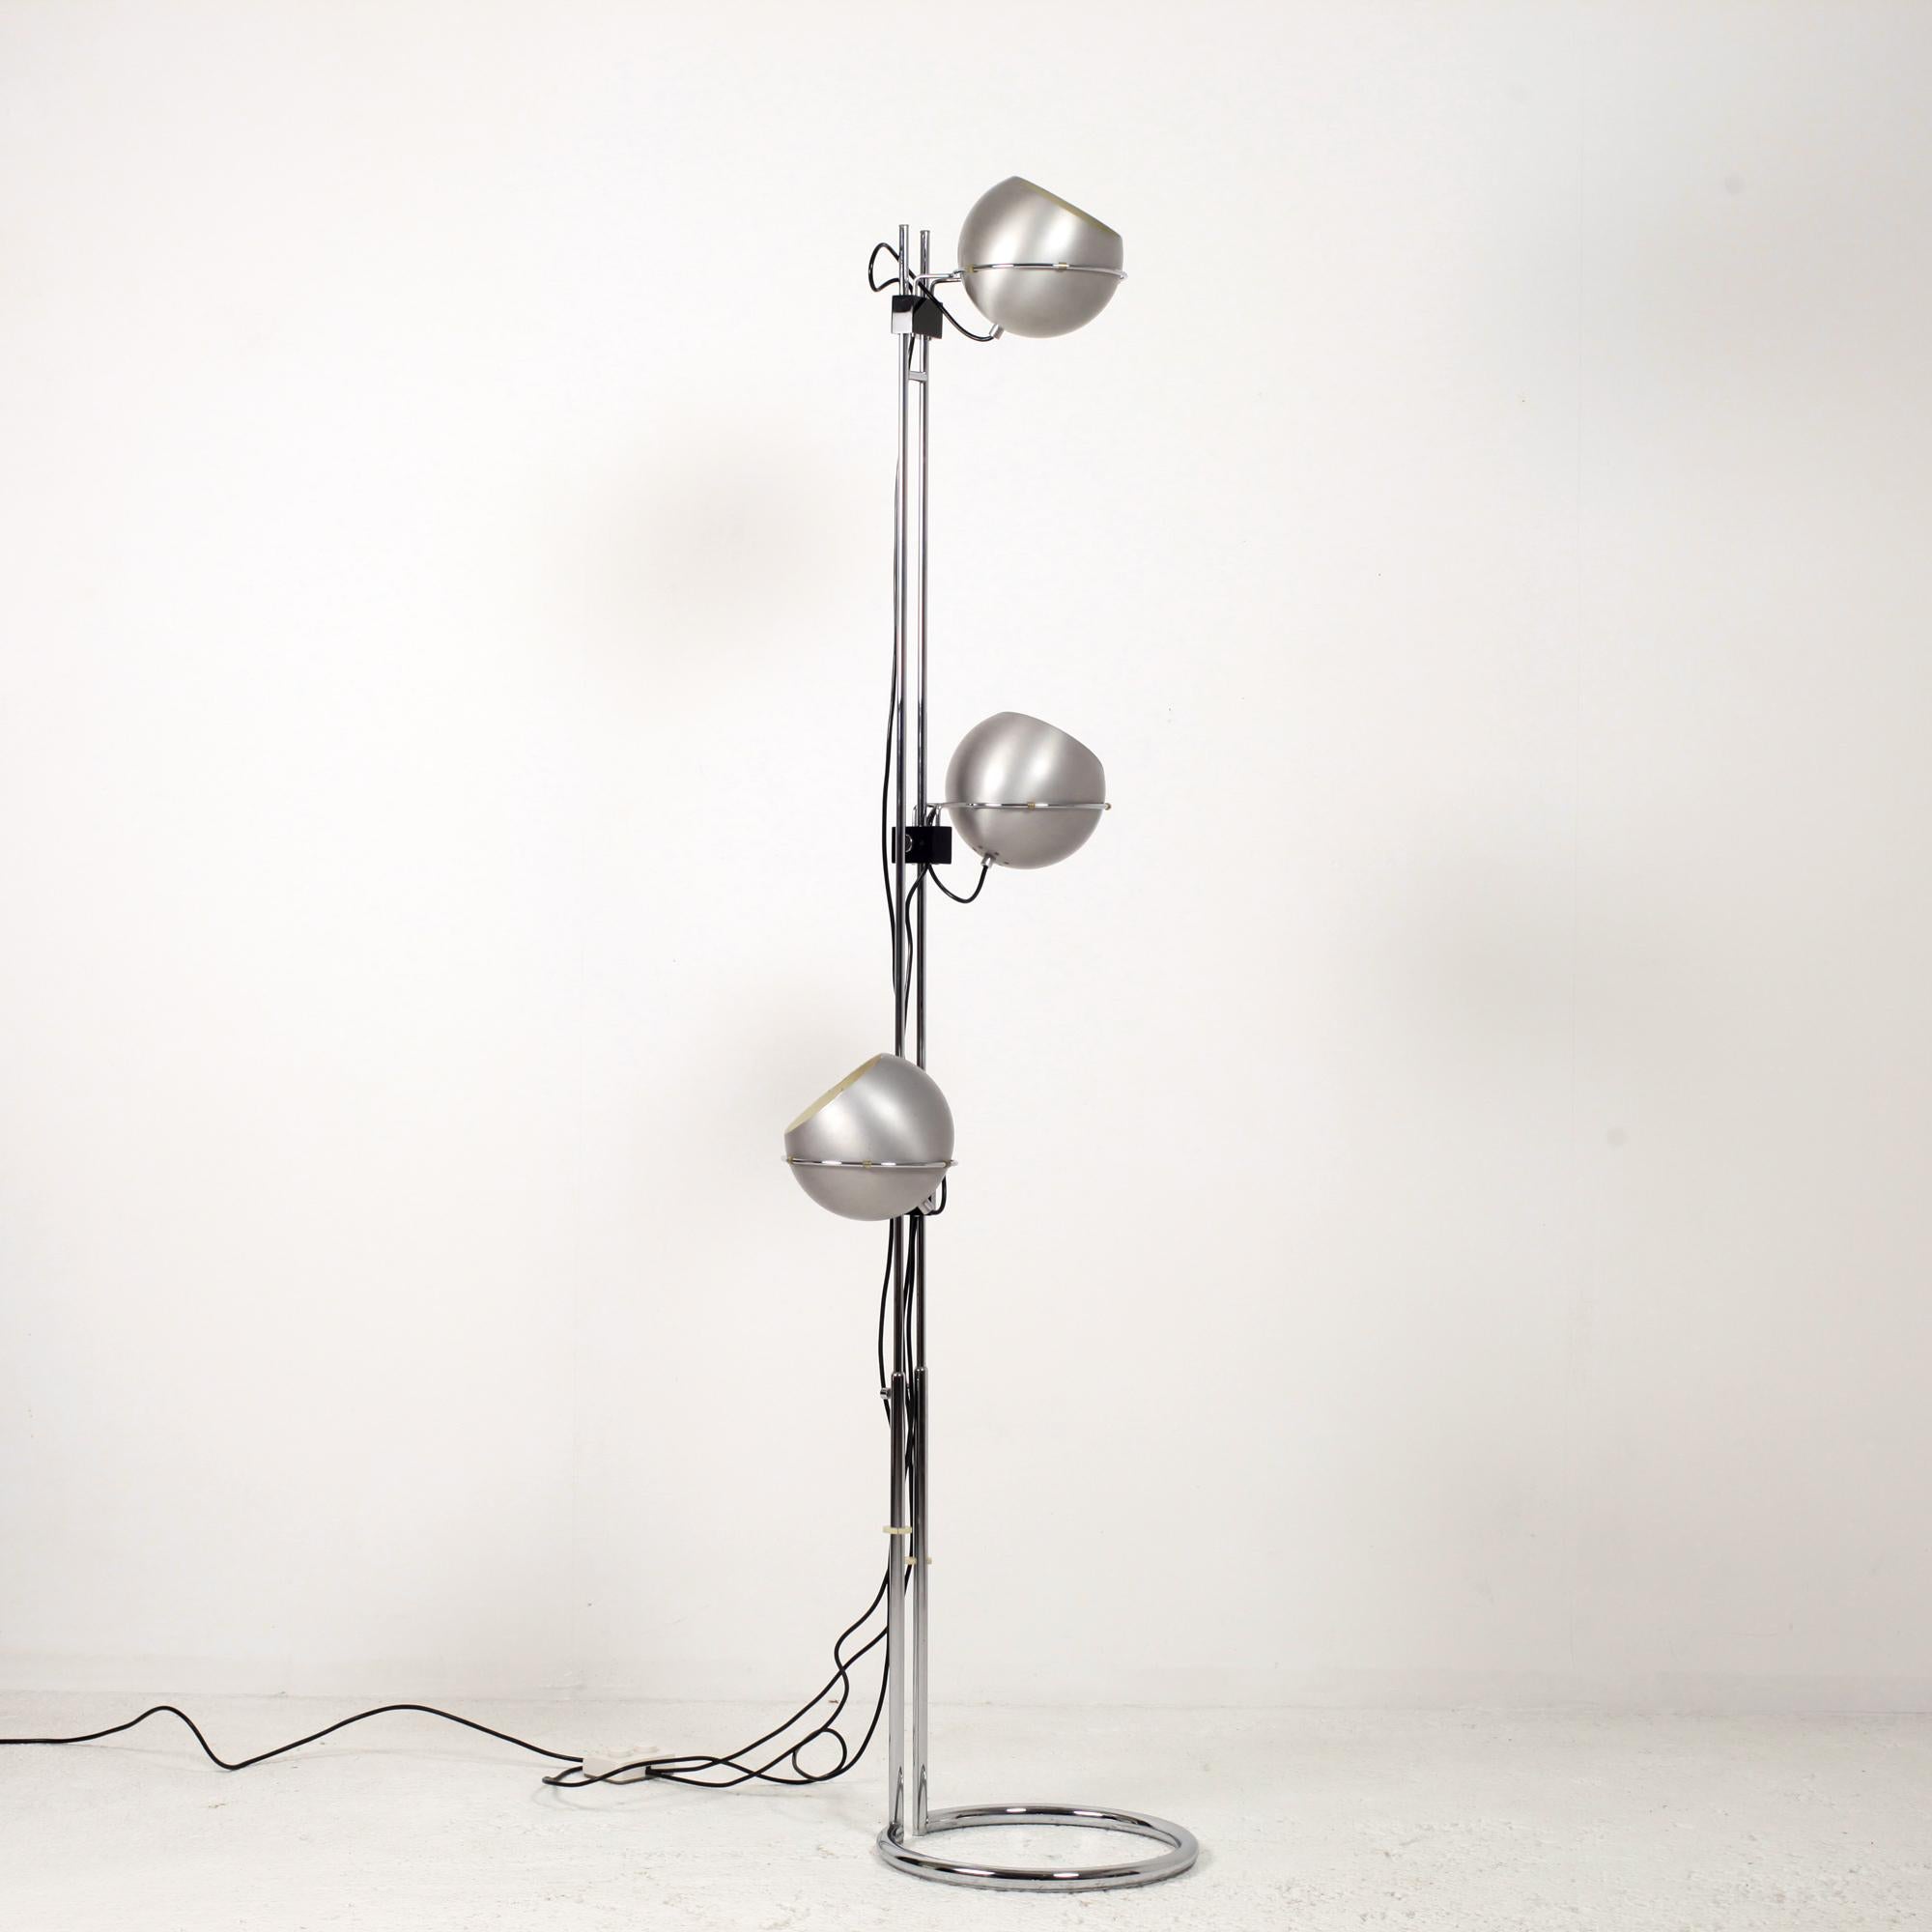 Eyeball floor lamp with 3 height-adjustable lights. The structure in chromed tubular metal was telescopic, spherical reflectors in brushed aluminum with ivory lacquered interiors. Each sphere is height adjustable and orientable. Very nice ambient or